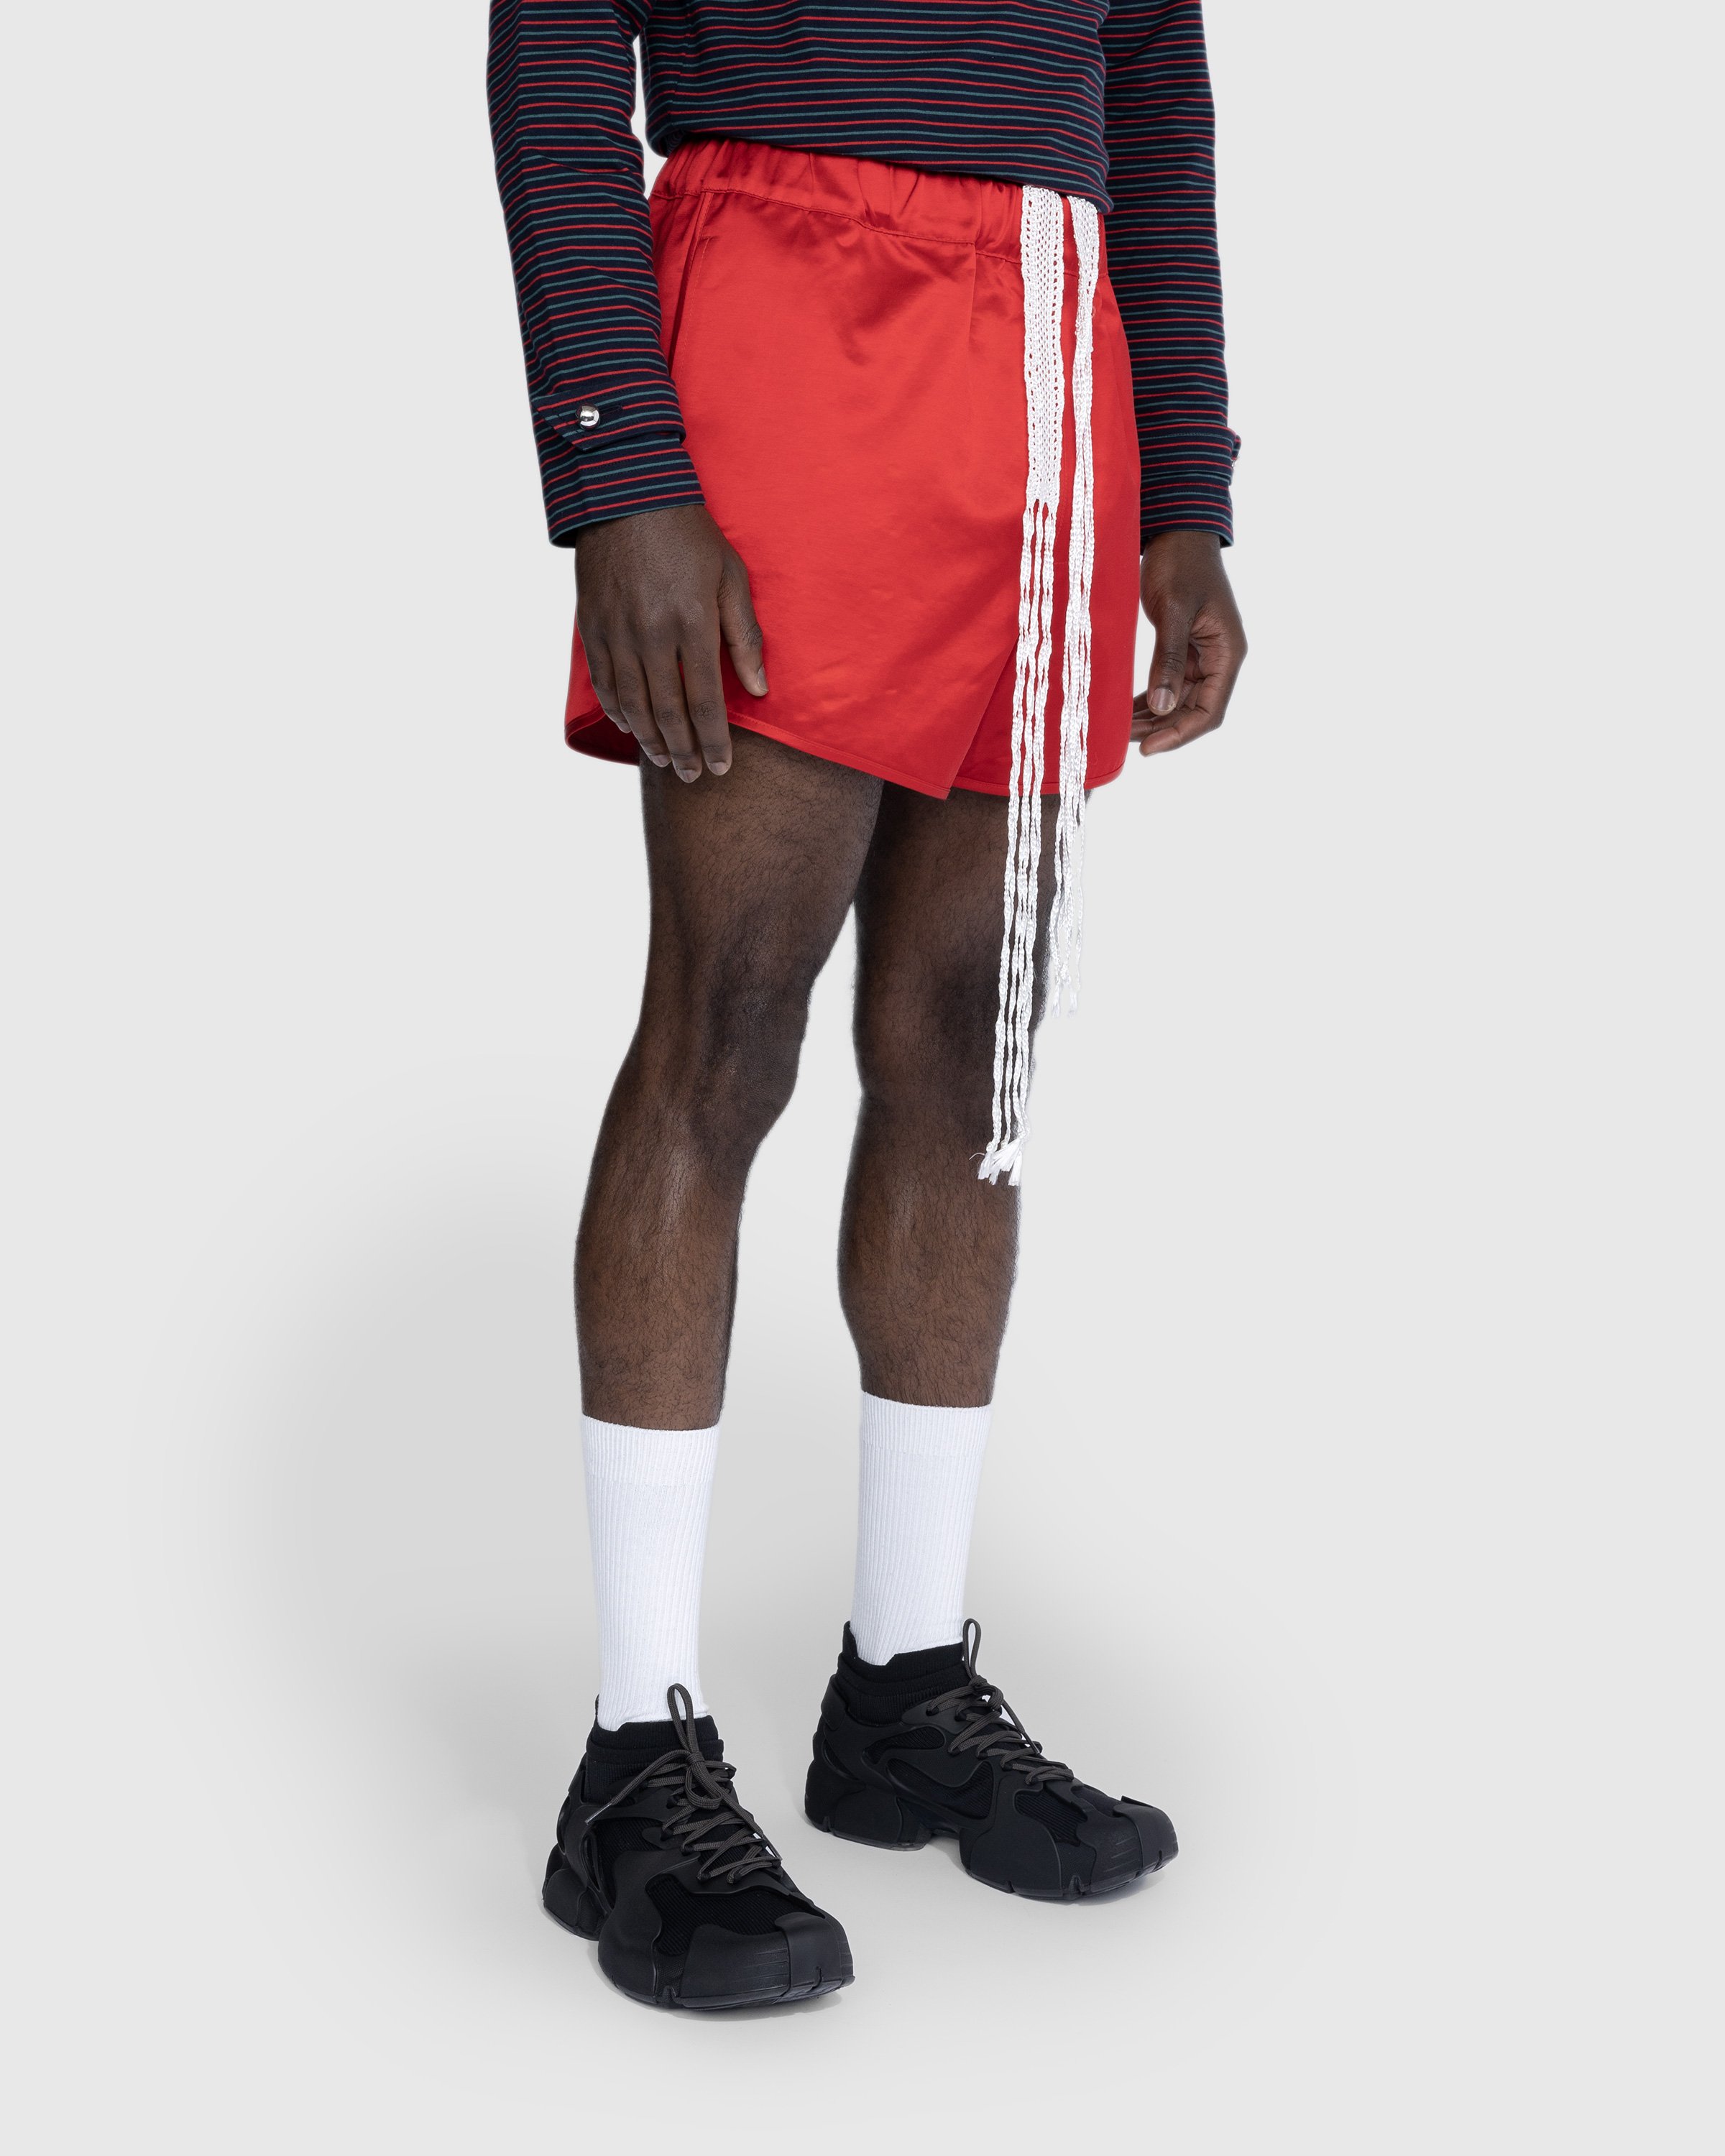 Wales Bonner - Cassette Shorts - Clothing - Red - Image 4